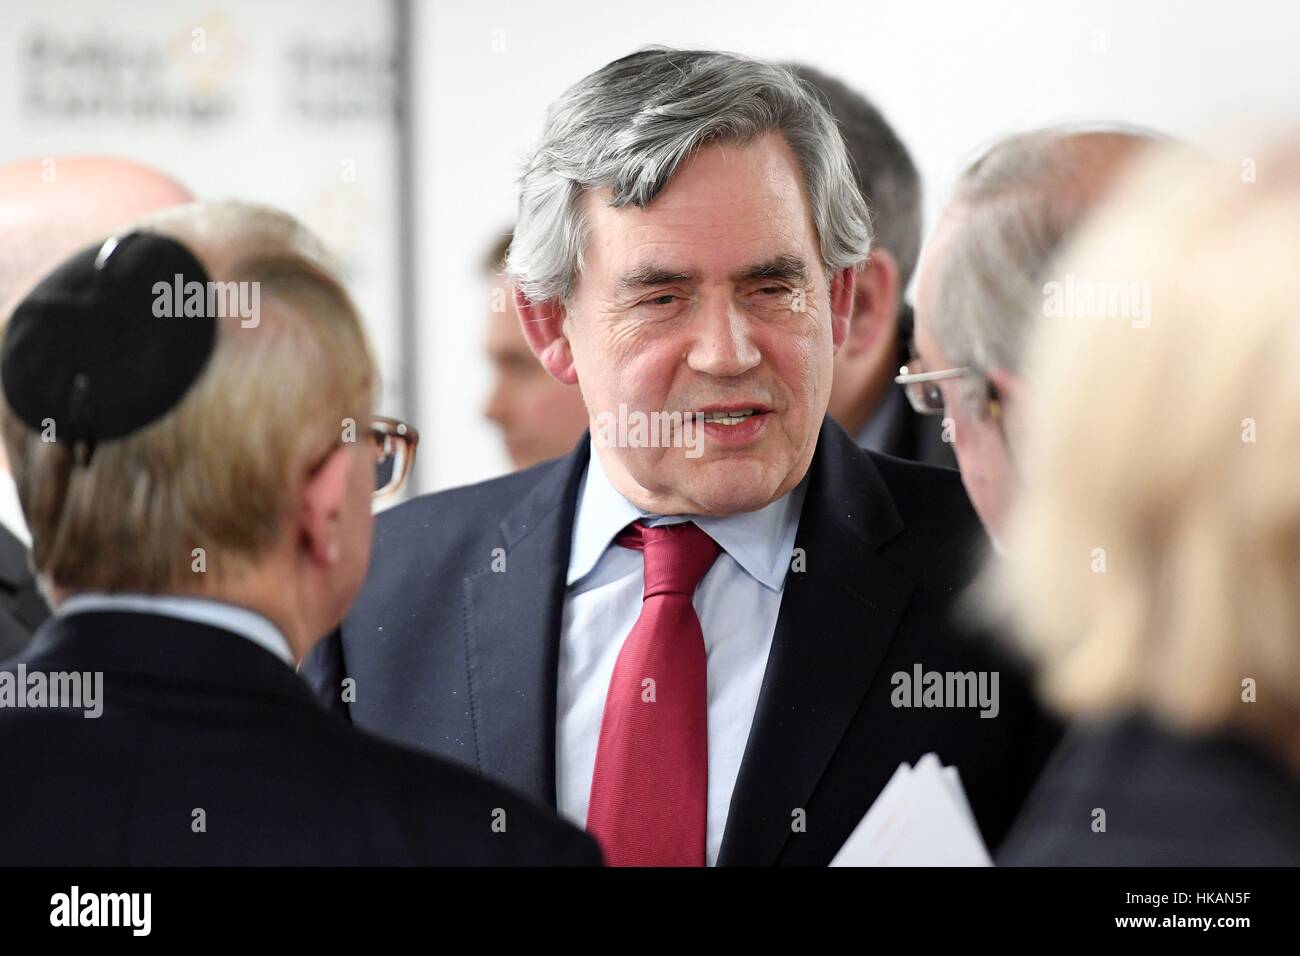 Former Prime Minister Gordon Brown at the launch of a new bipartisan report titled The Cost of Doing Nothing, co-authored by the late Jo Cox MP, at the Policy Exchange in Westminster, London. Stock Photo